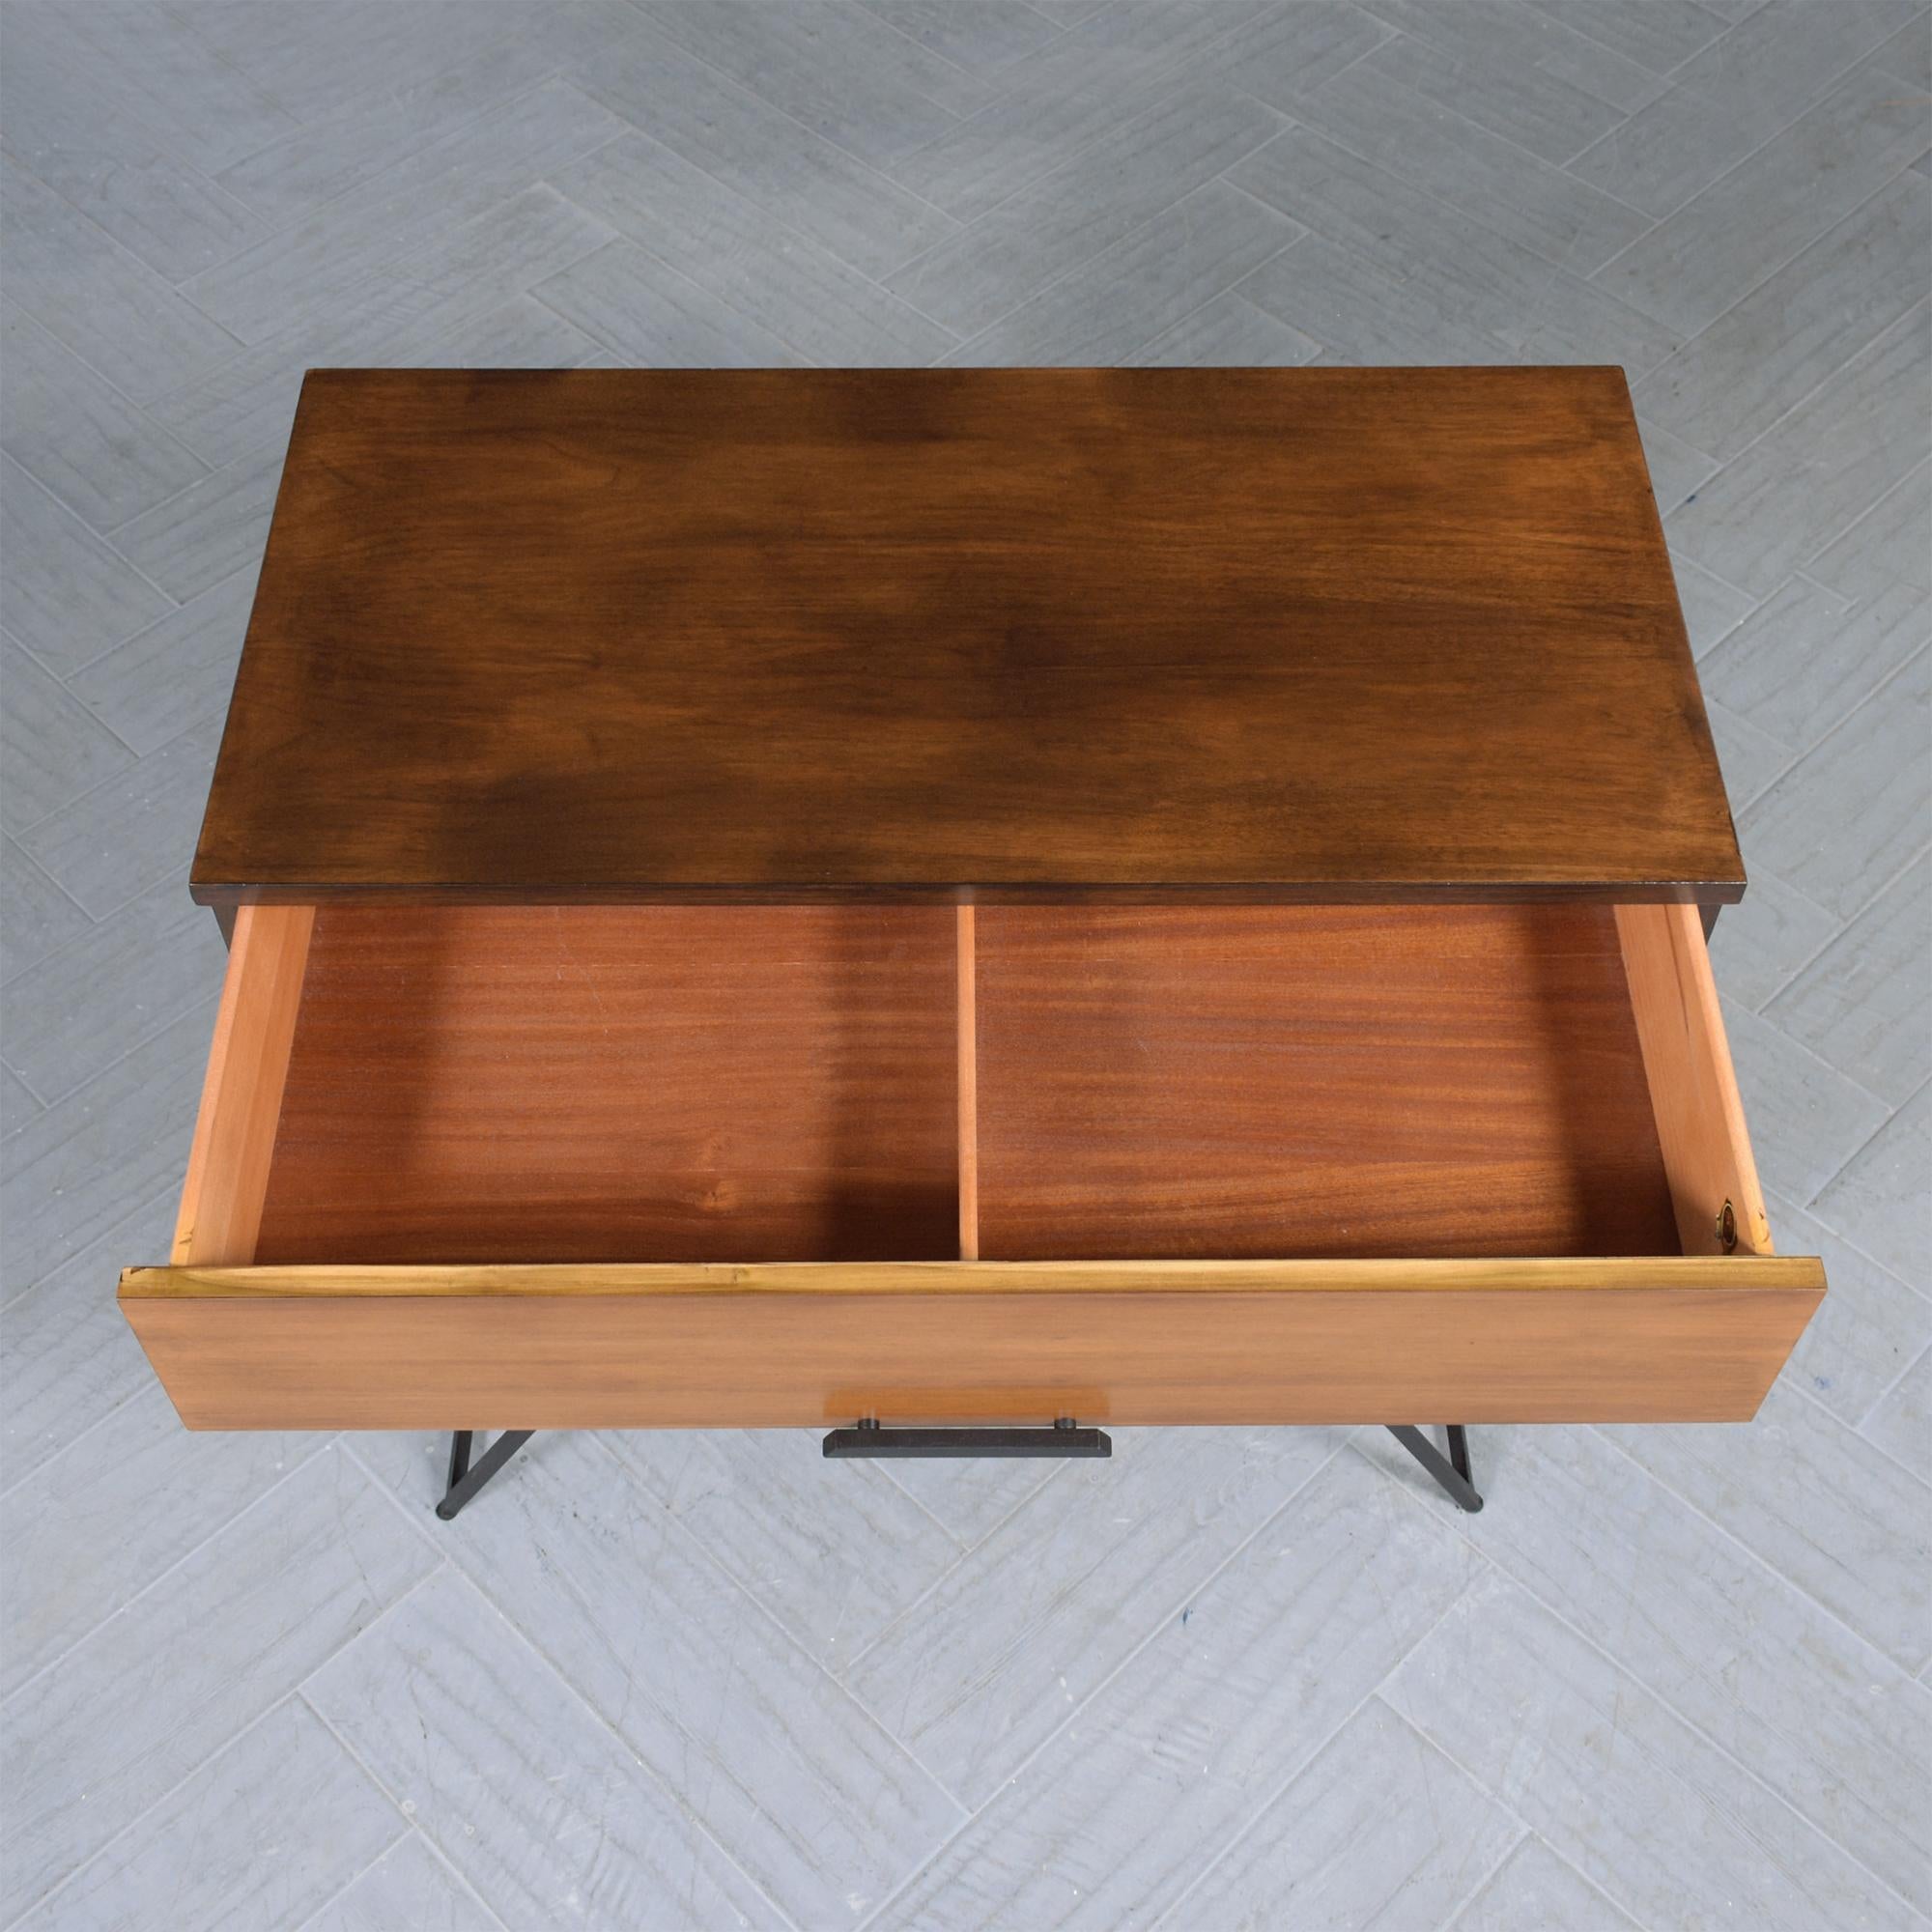 Walnut Restored 1960s Mid-Century Modern Wood Chest with Wrought Iron Handles For Sale